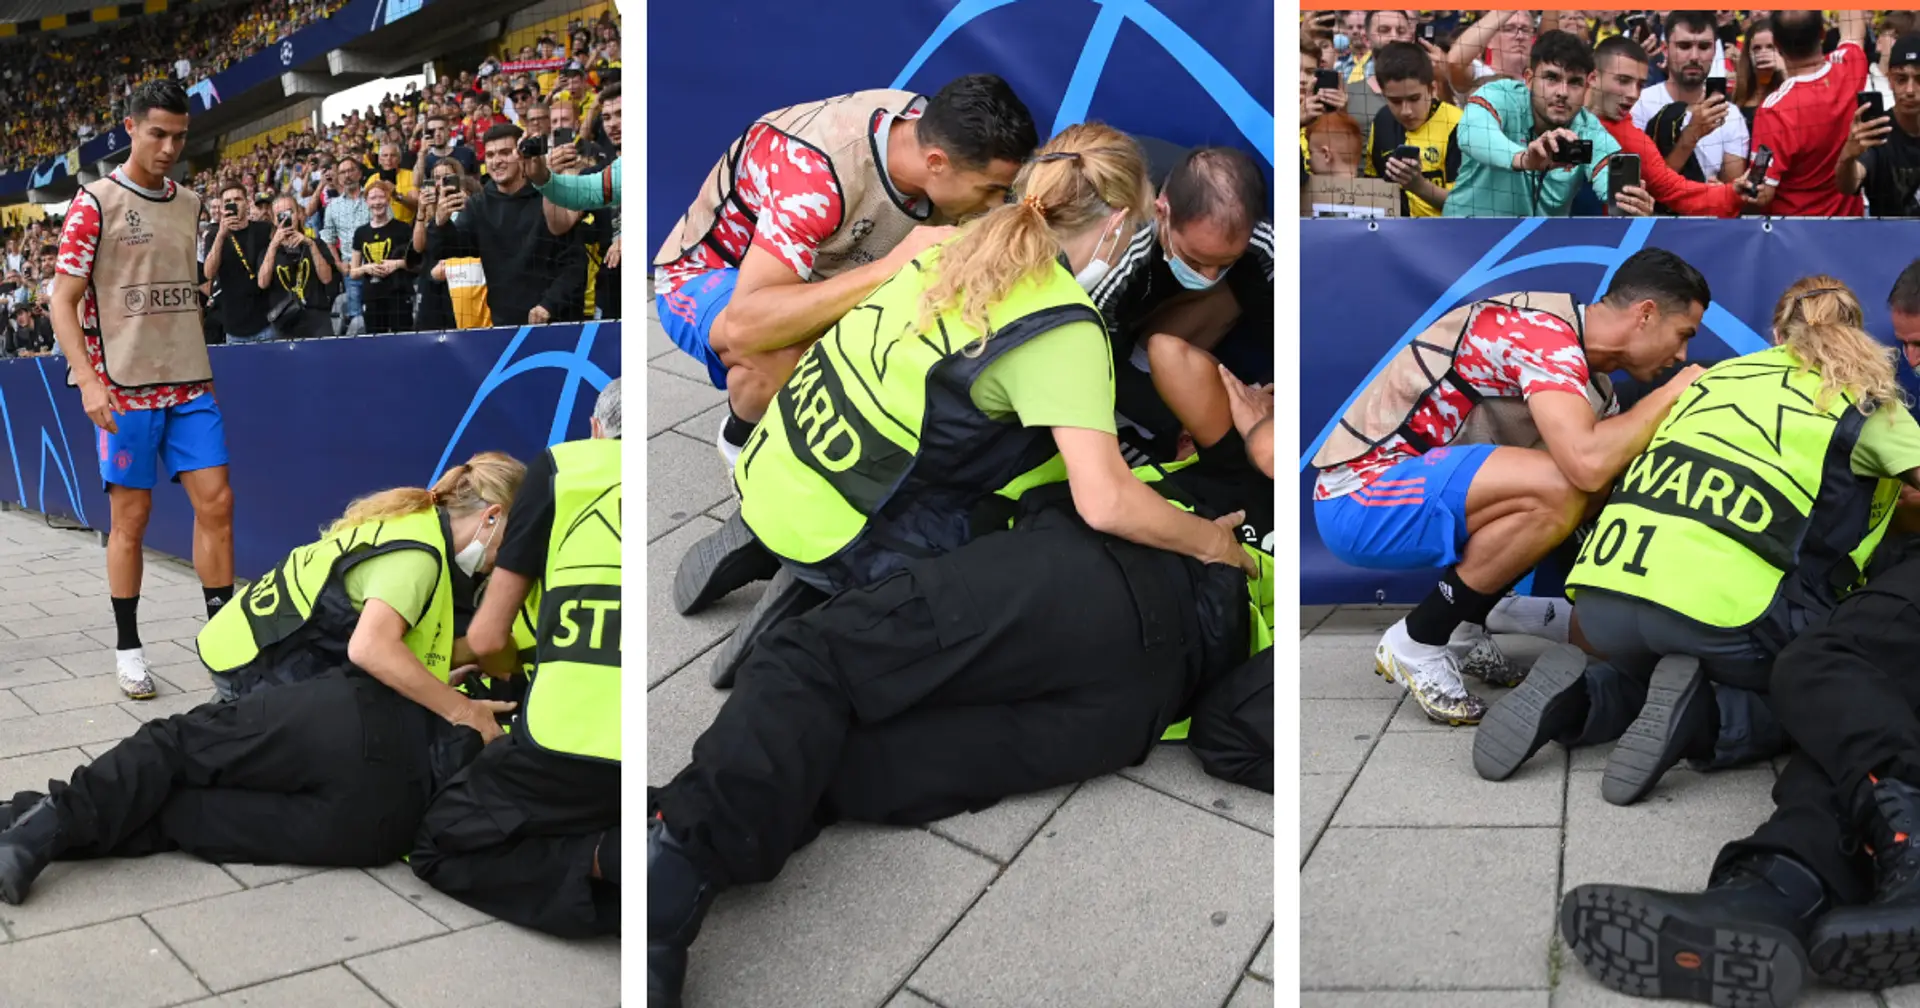 Cristiano Ronaldo accidentally injuries security guard before Young Boys clash